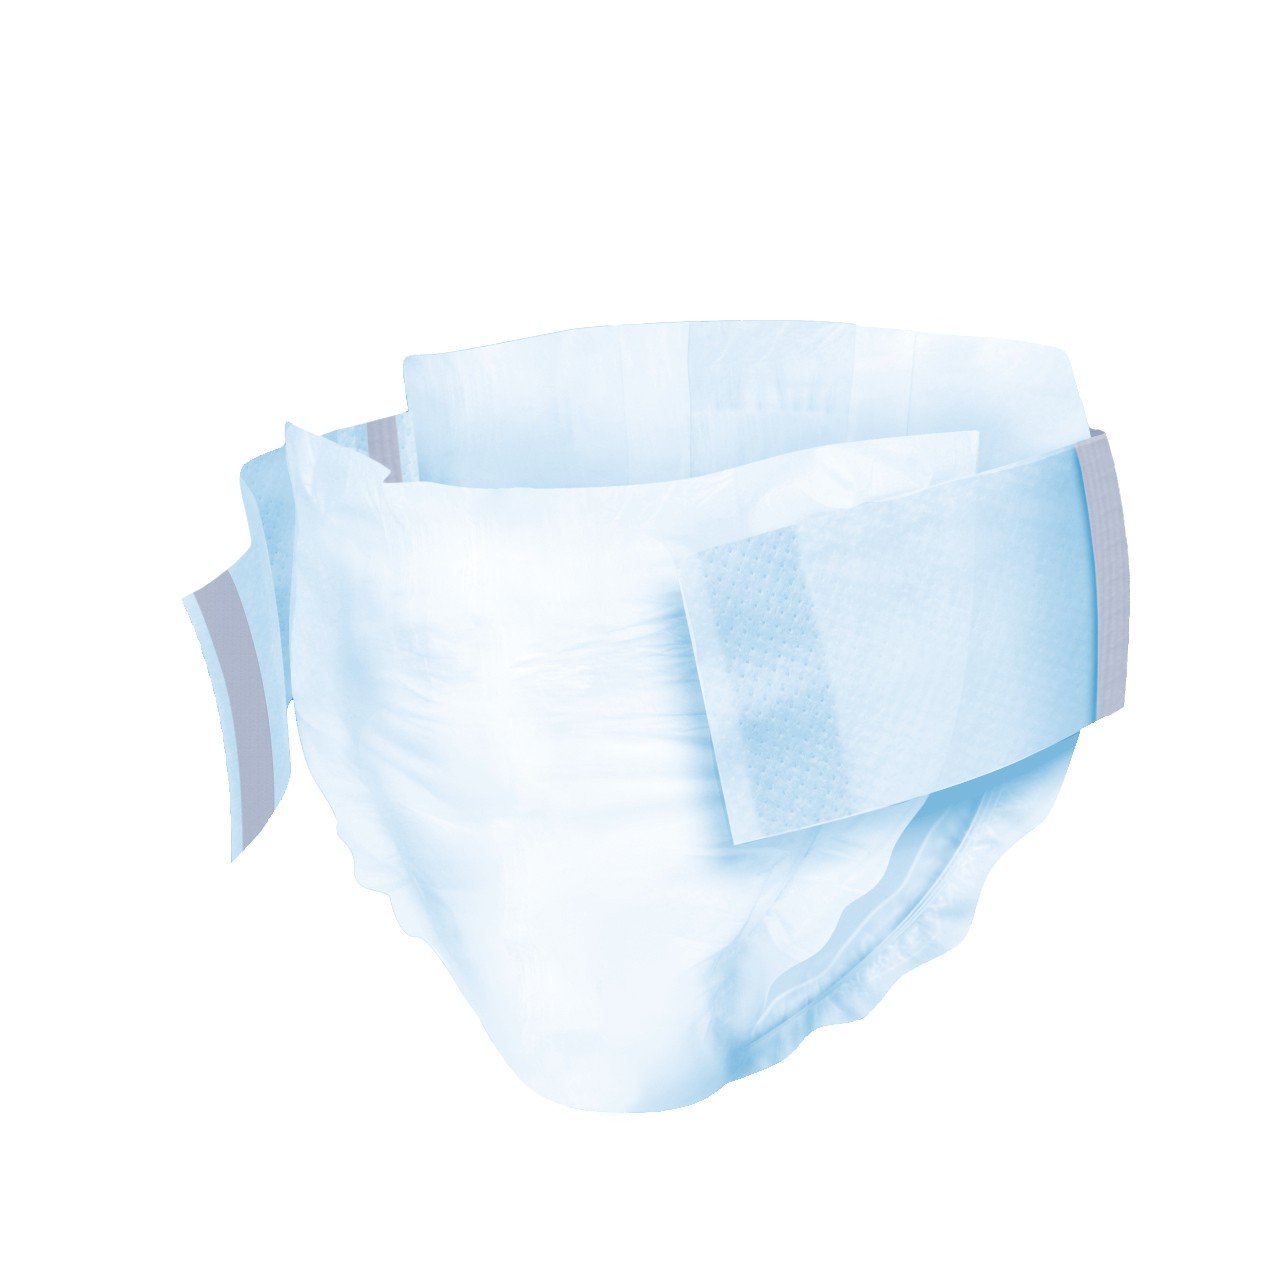 TENA Absorbent Stretch Plus Disposable Adult Incontinent Brief Tab